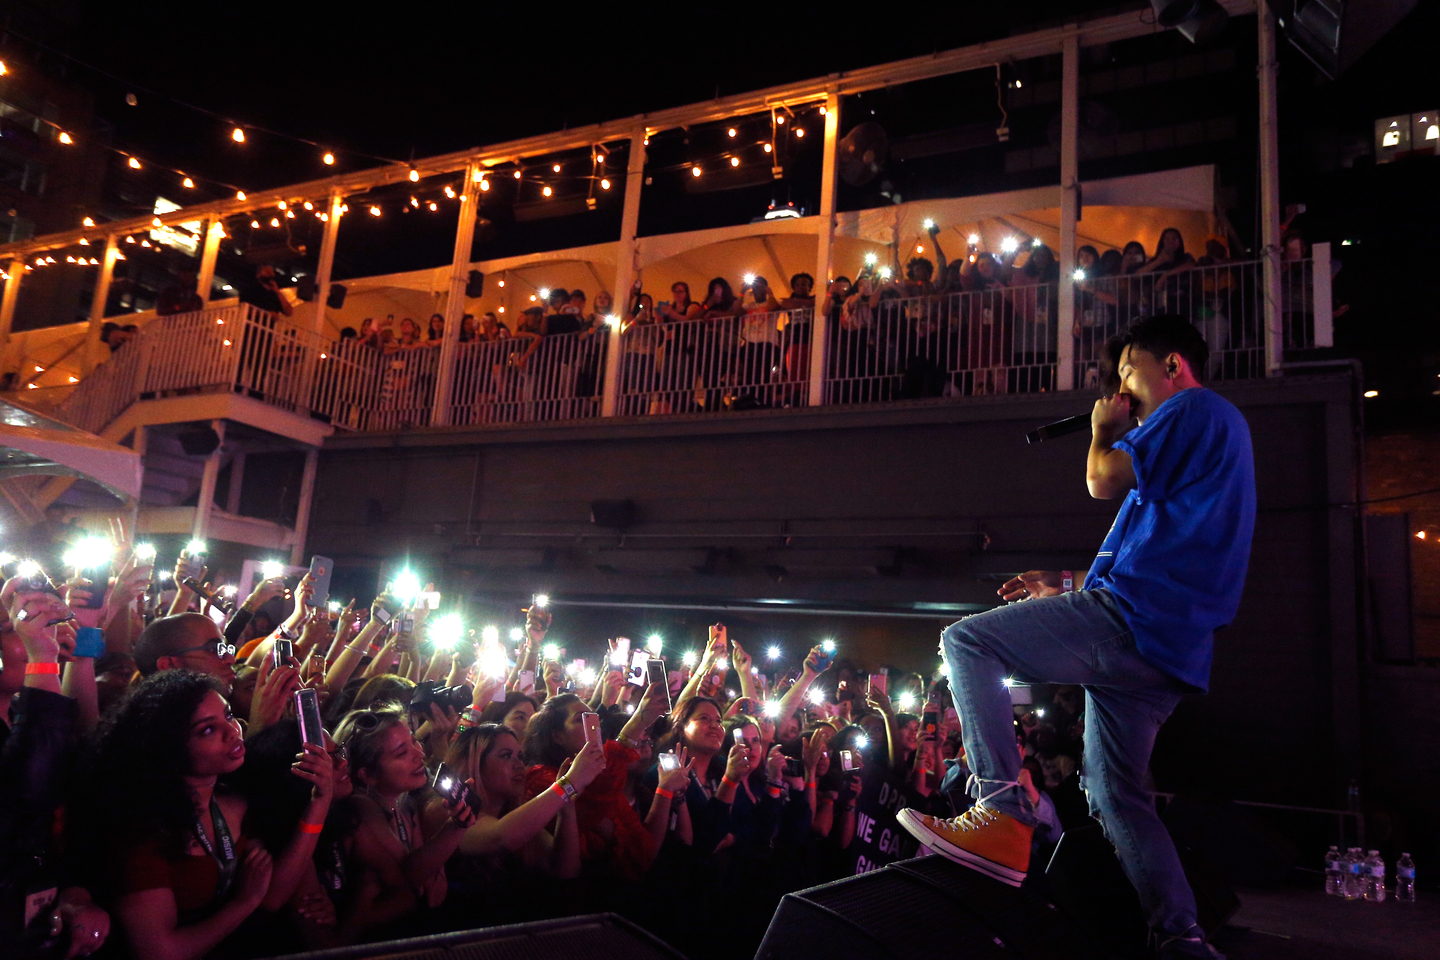 DPR Live was part of the Korea Spotlight show at The Belmont. Photo by Steve Rogers Photography/Getty Images for SXSW